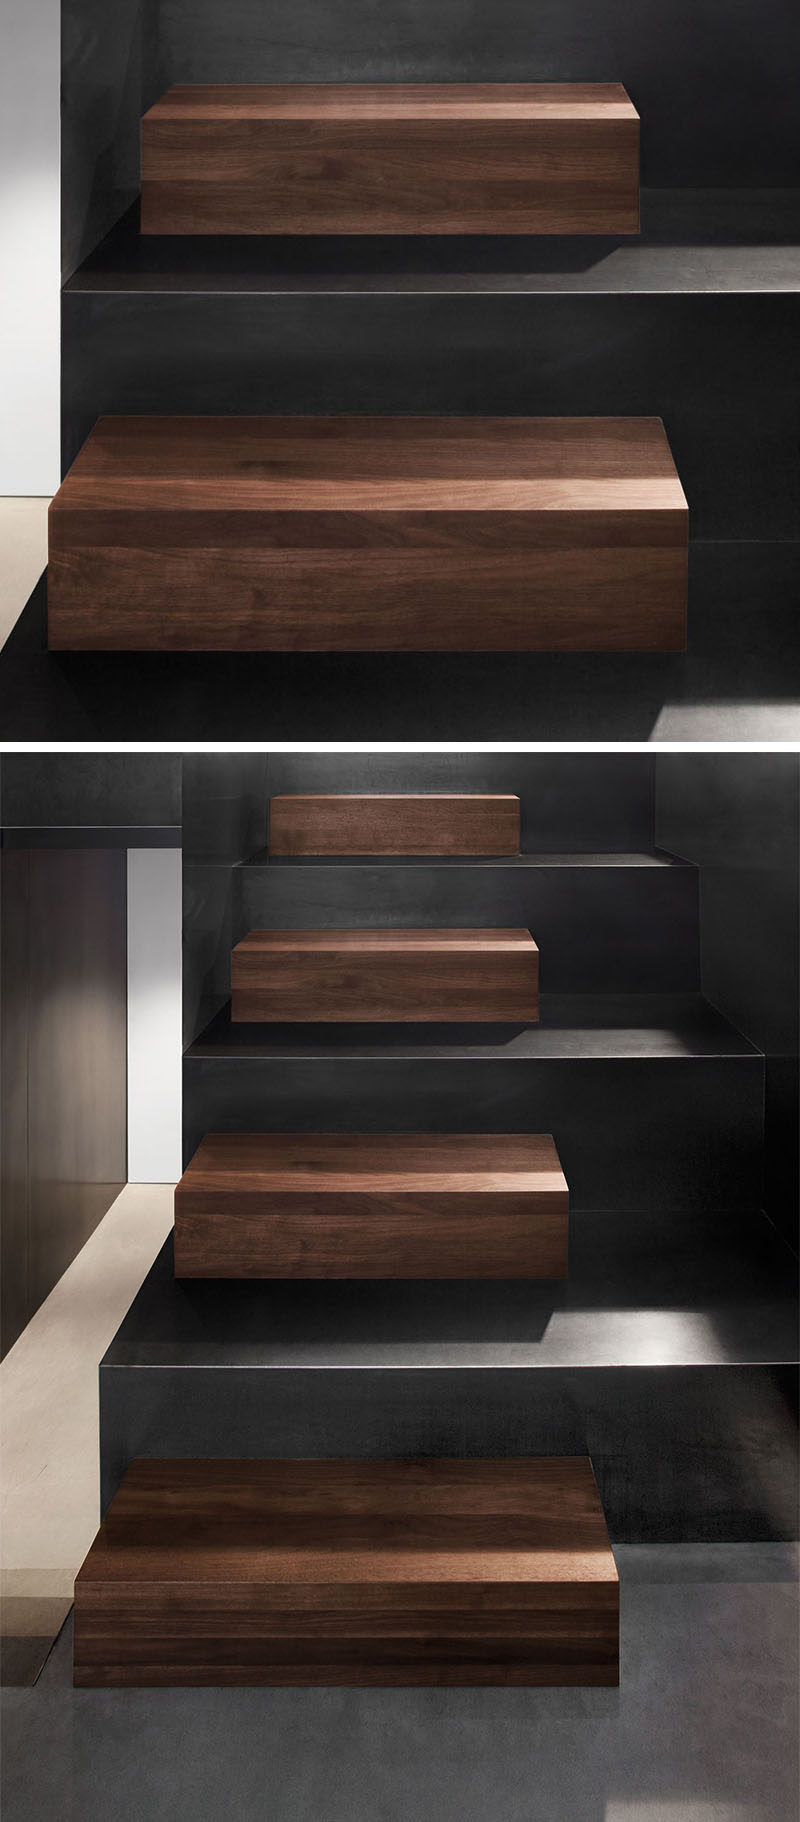 18 Examples Of Stair Details To Inspire You // You can either take big steps or little steps on these steel and walnut stairs.